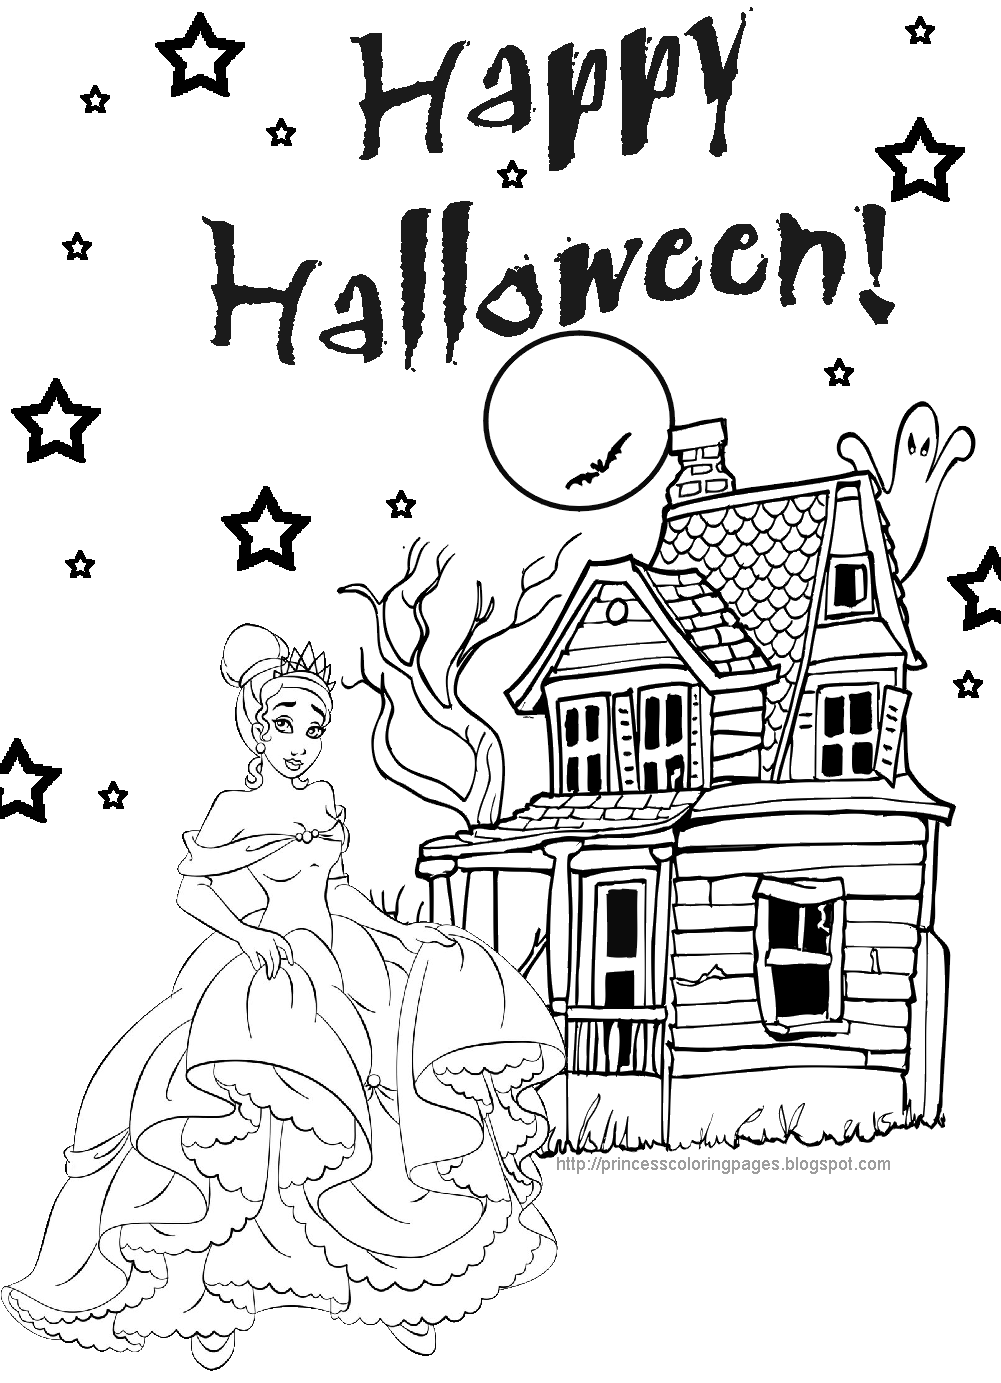 Disney Princess Halloween Coloring Pages - Coloring Home